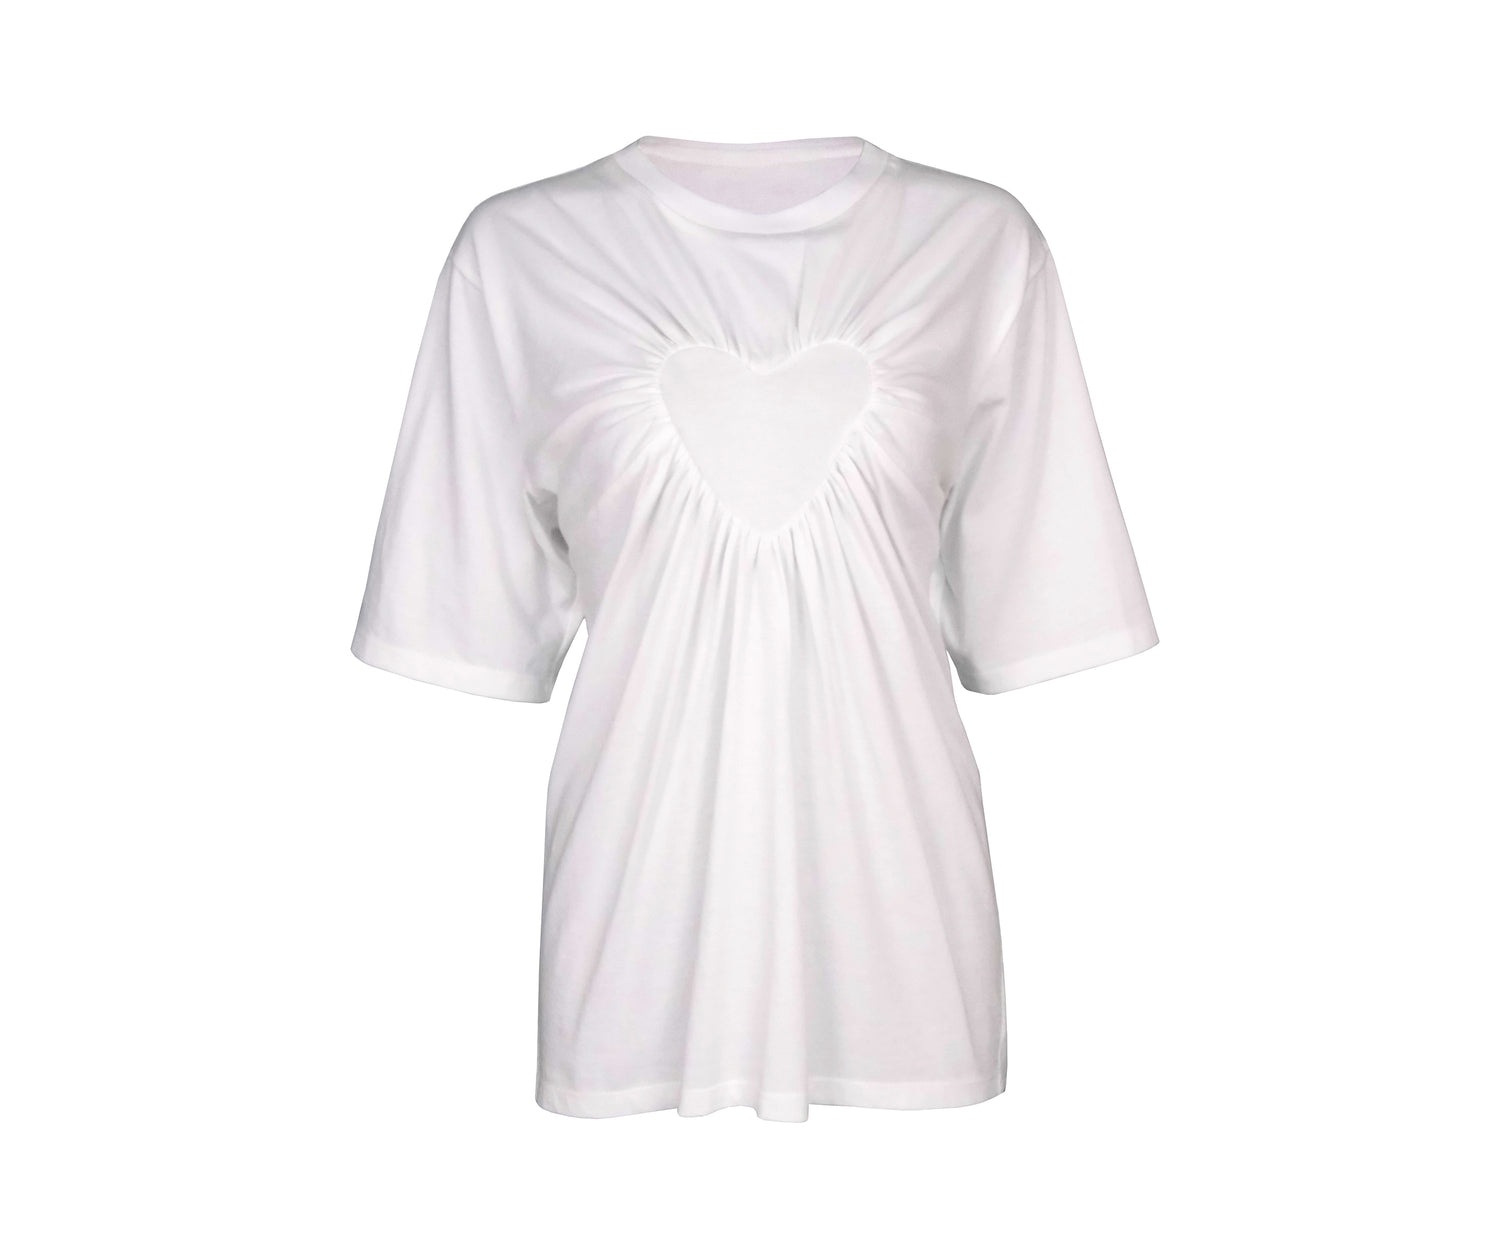 gathered heart t-shirt lovingly made in organic white cotton to raise mental health awareness